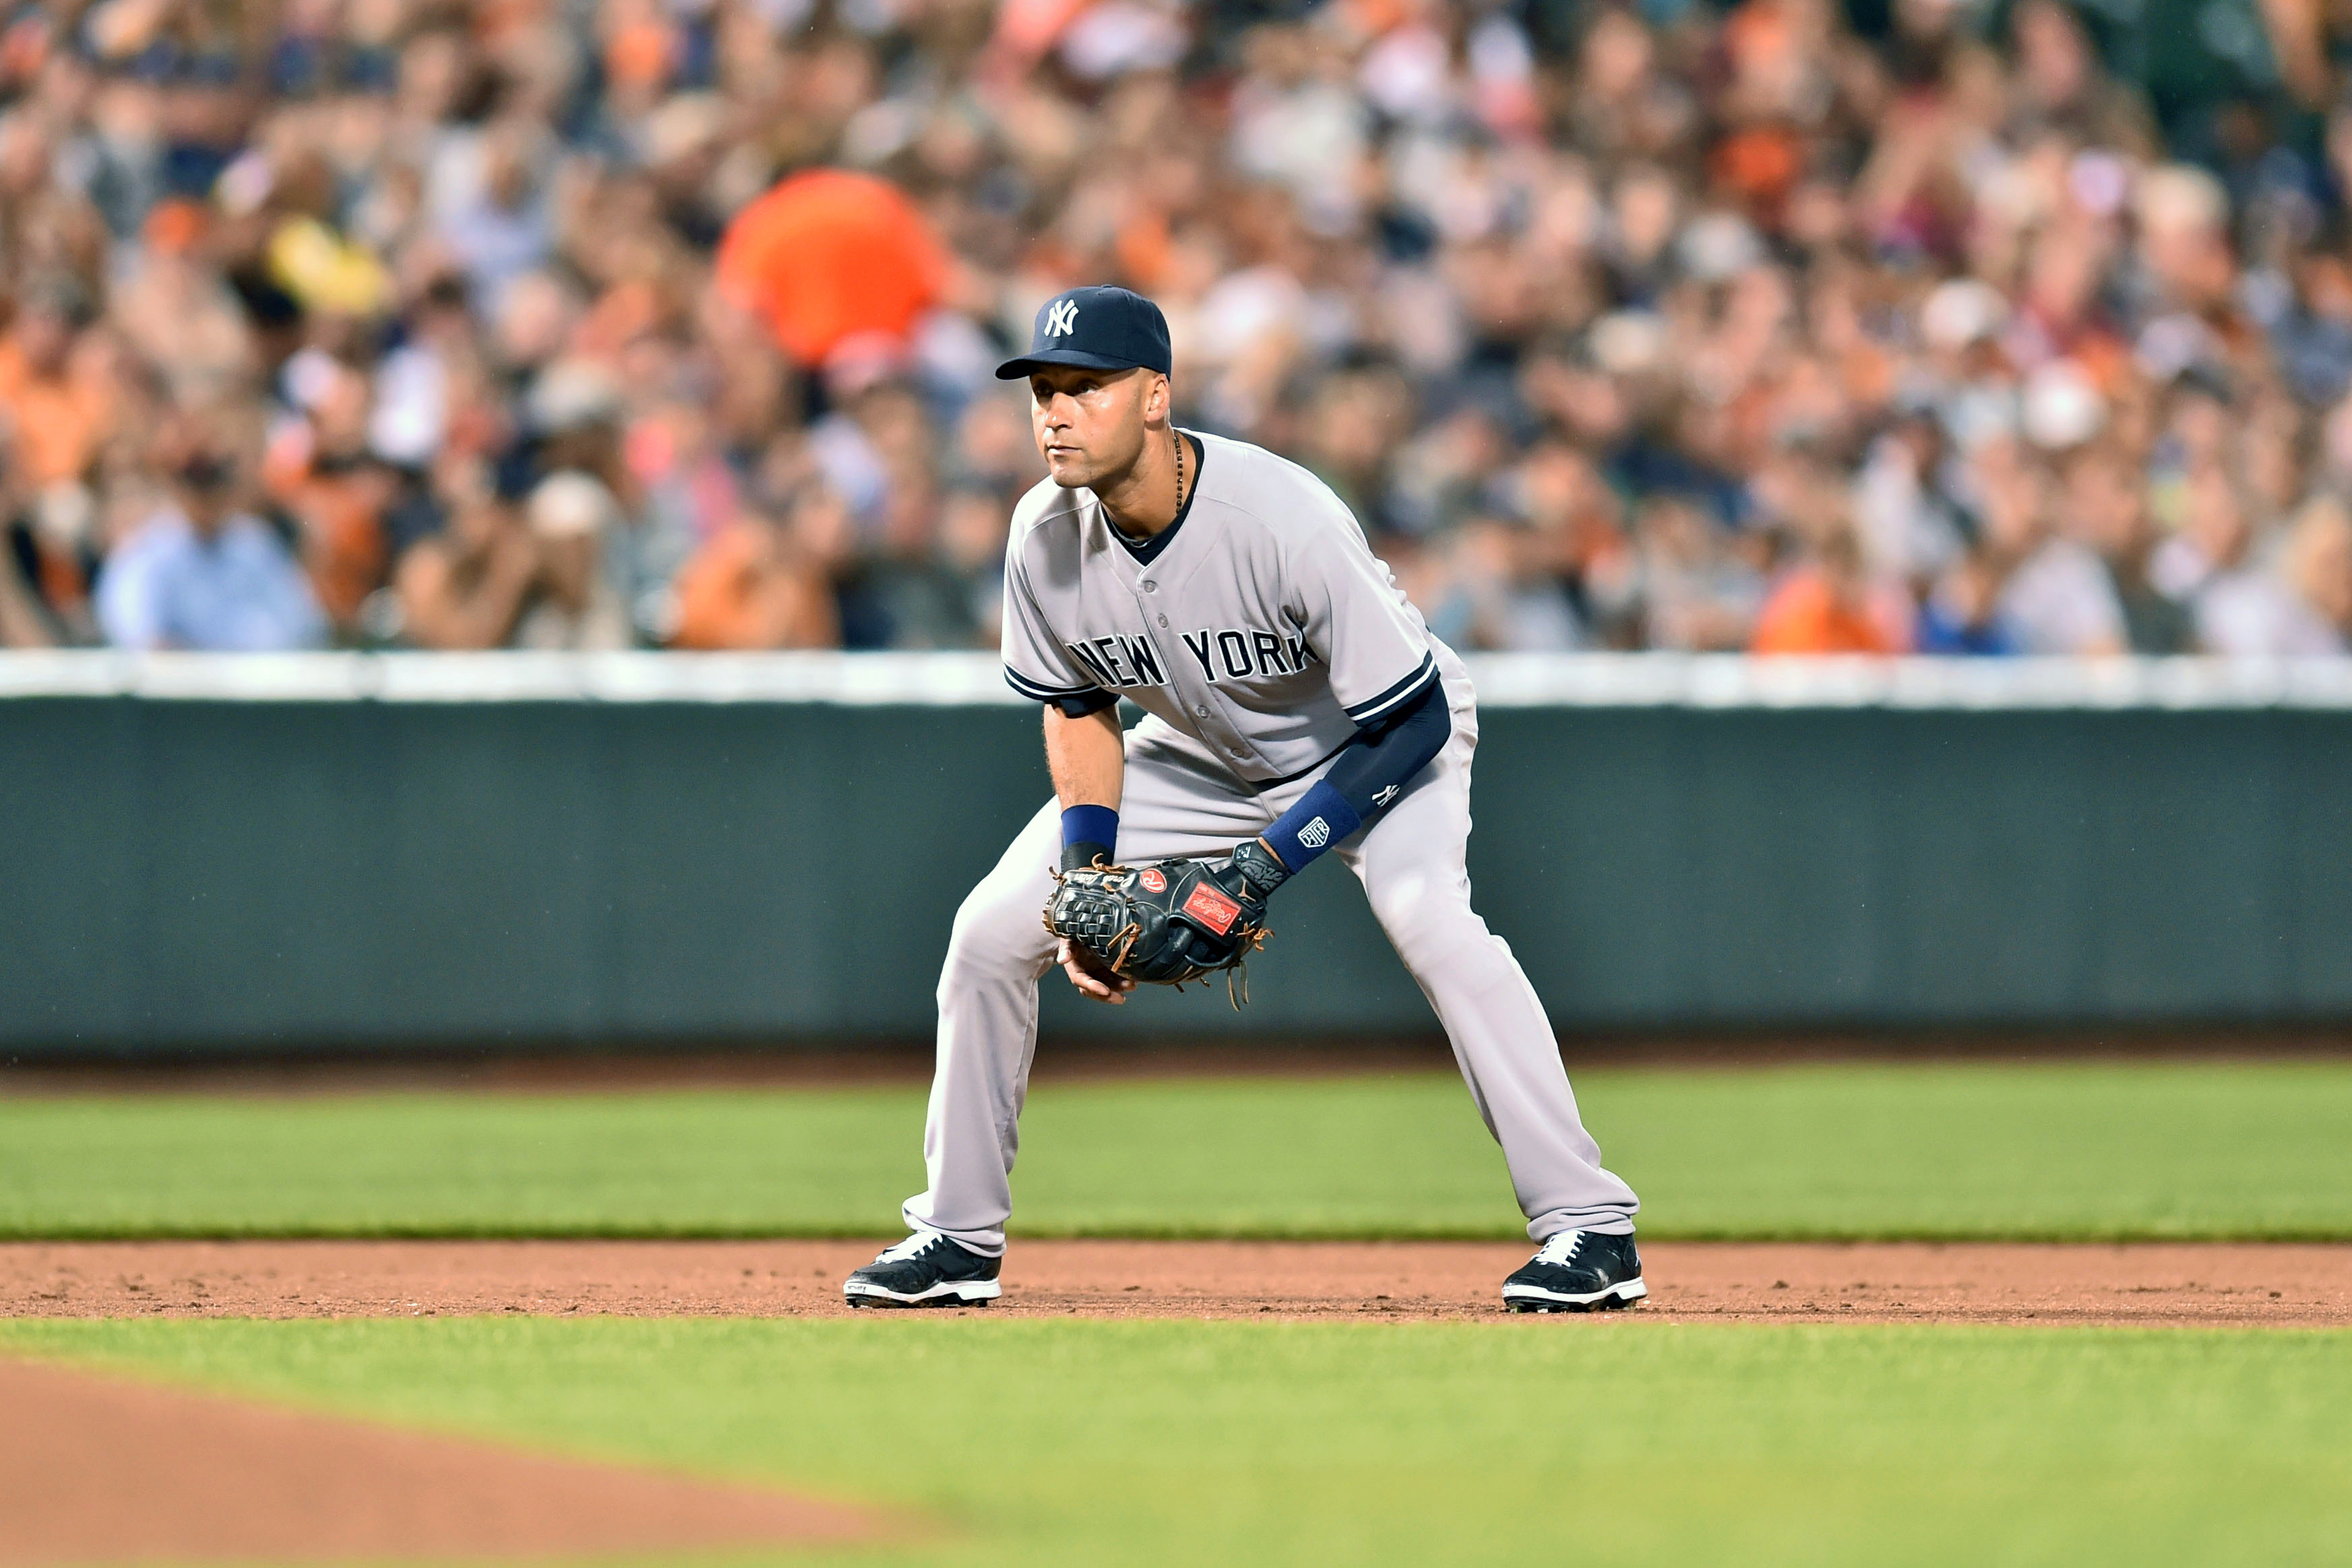 New York Yankees shortstop Derek Jeter #2 during a game against the Baltimore Orioles at Oriole Park at Camden Yards August 11, 2014 in Baltimore, Maryland. The Orioles defeated the Yankees 11-3.